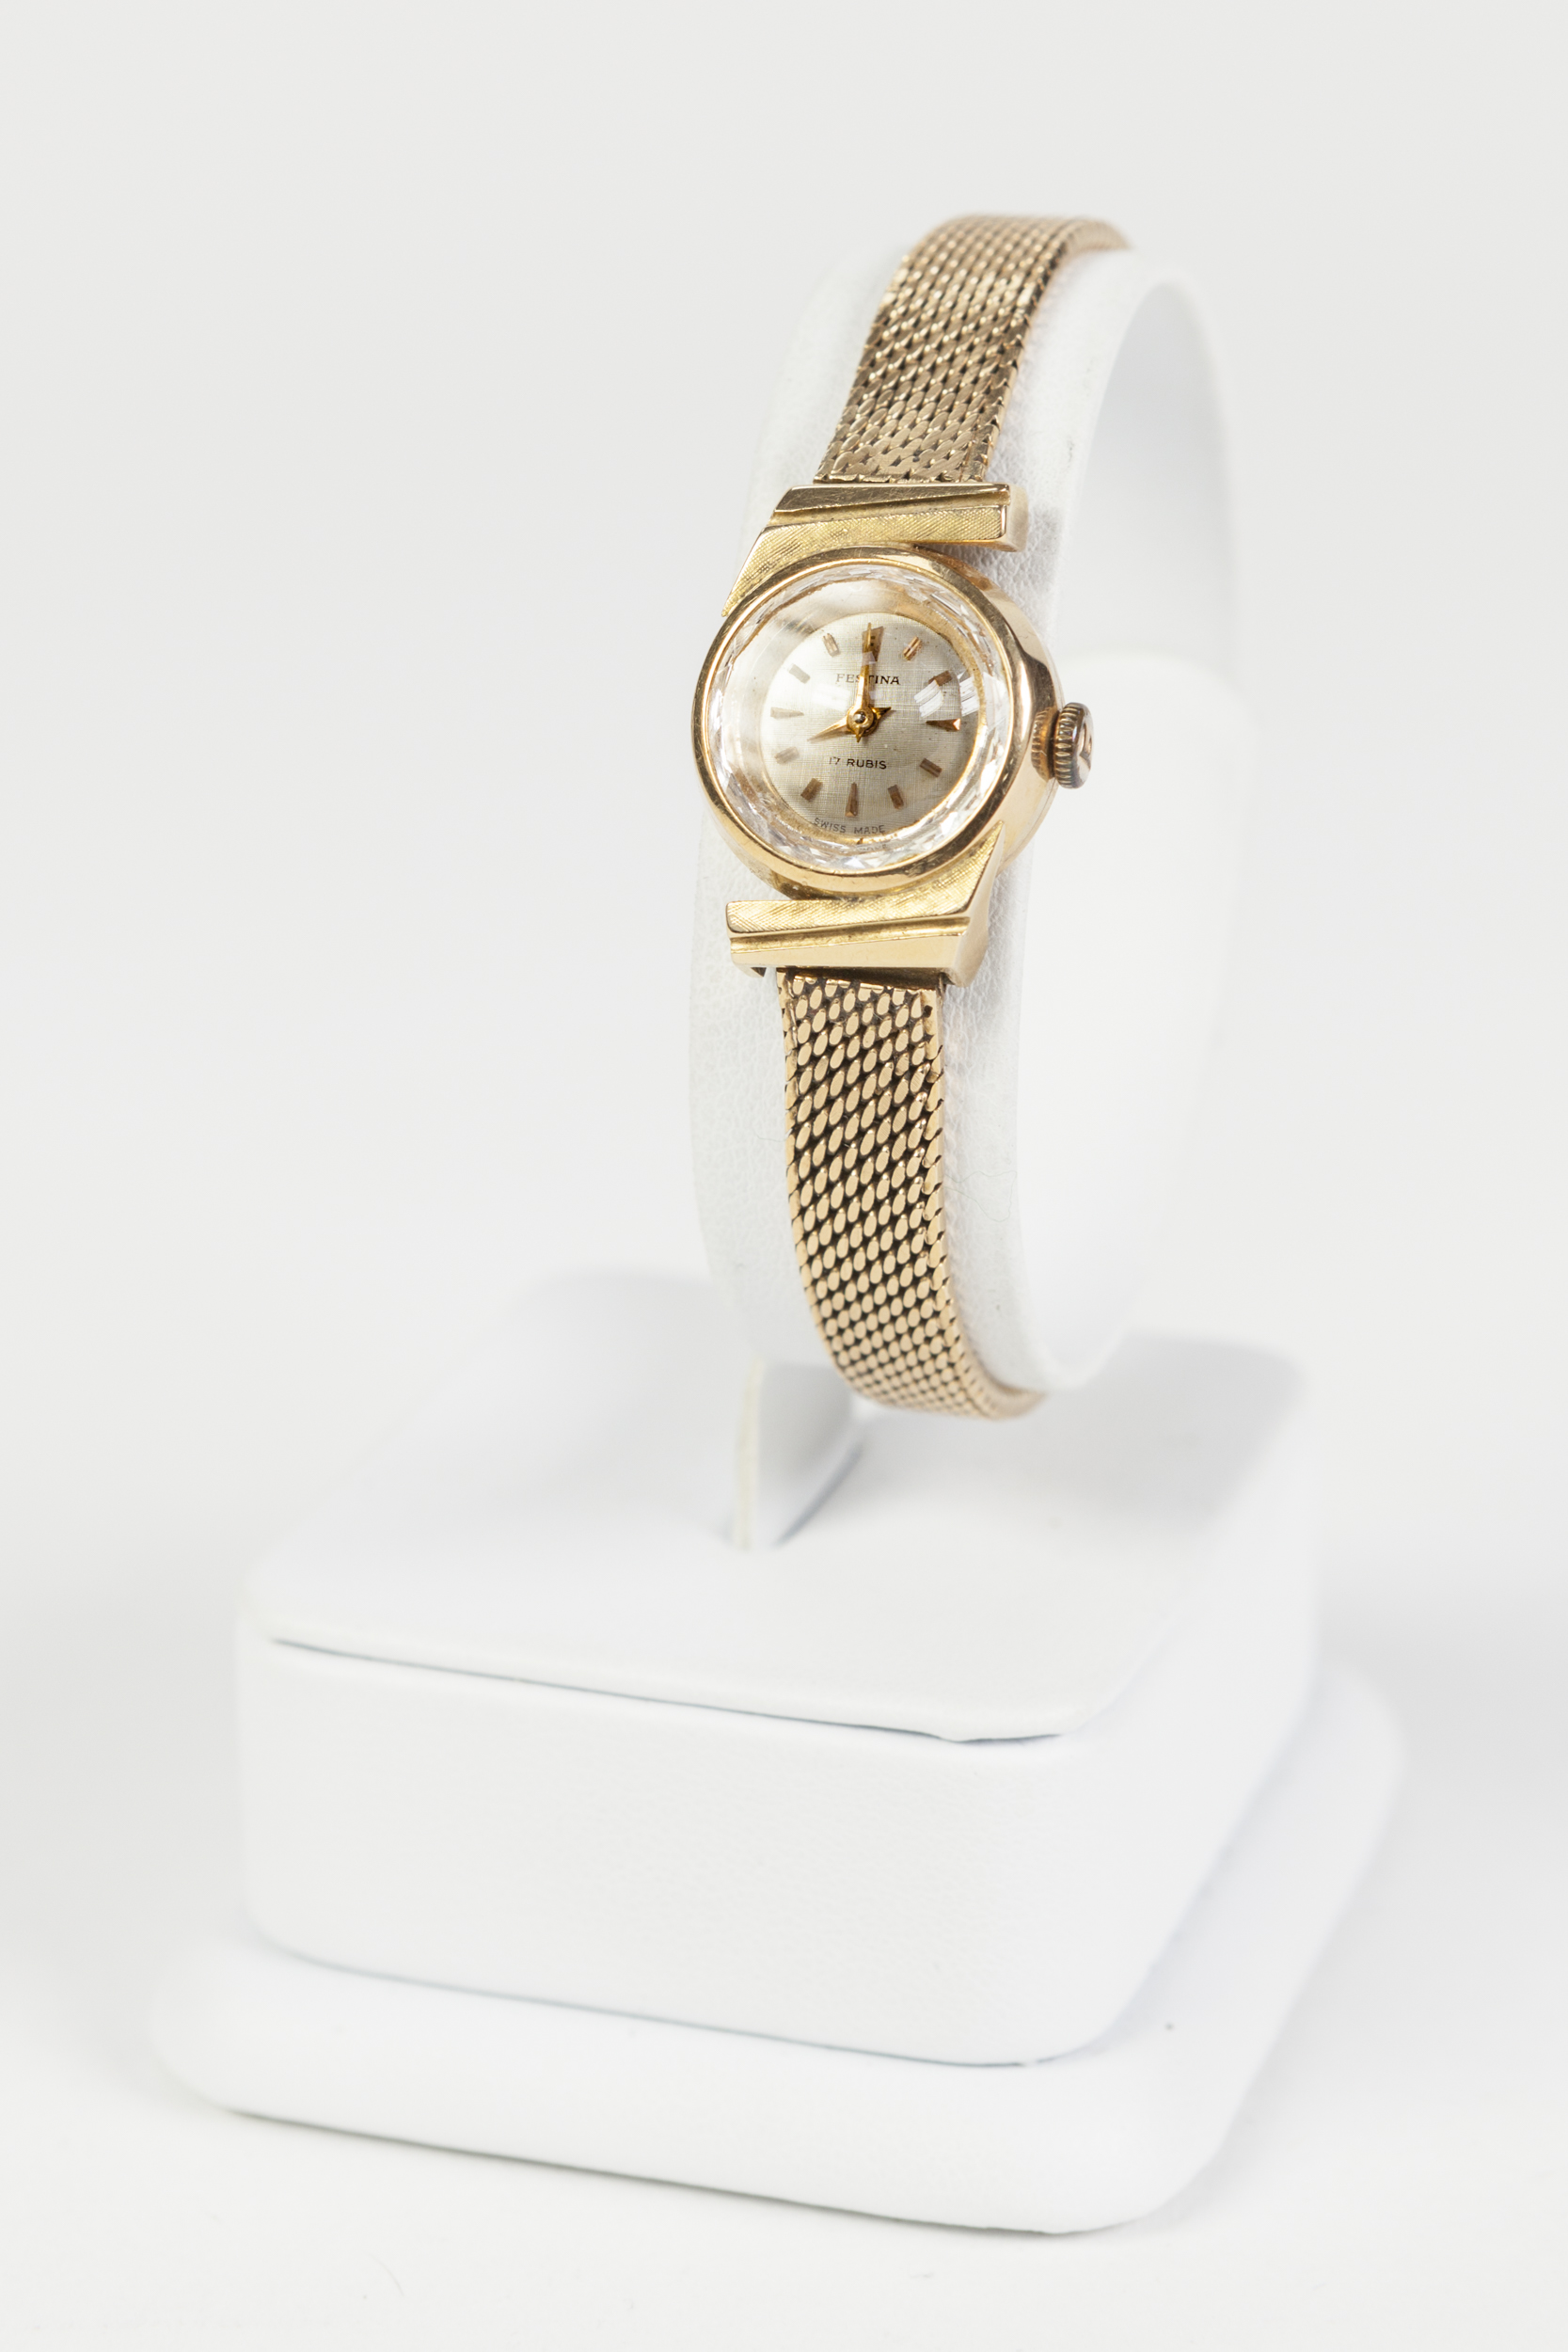 LADY'S 18ct GOLD 'FESTINA' WRIST WATCH, mechanical movement, small circular silvered dial with